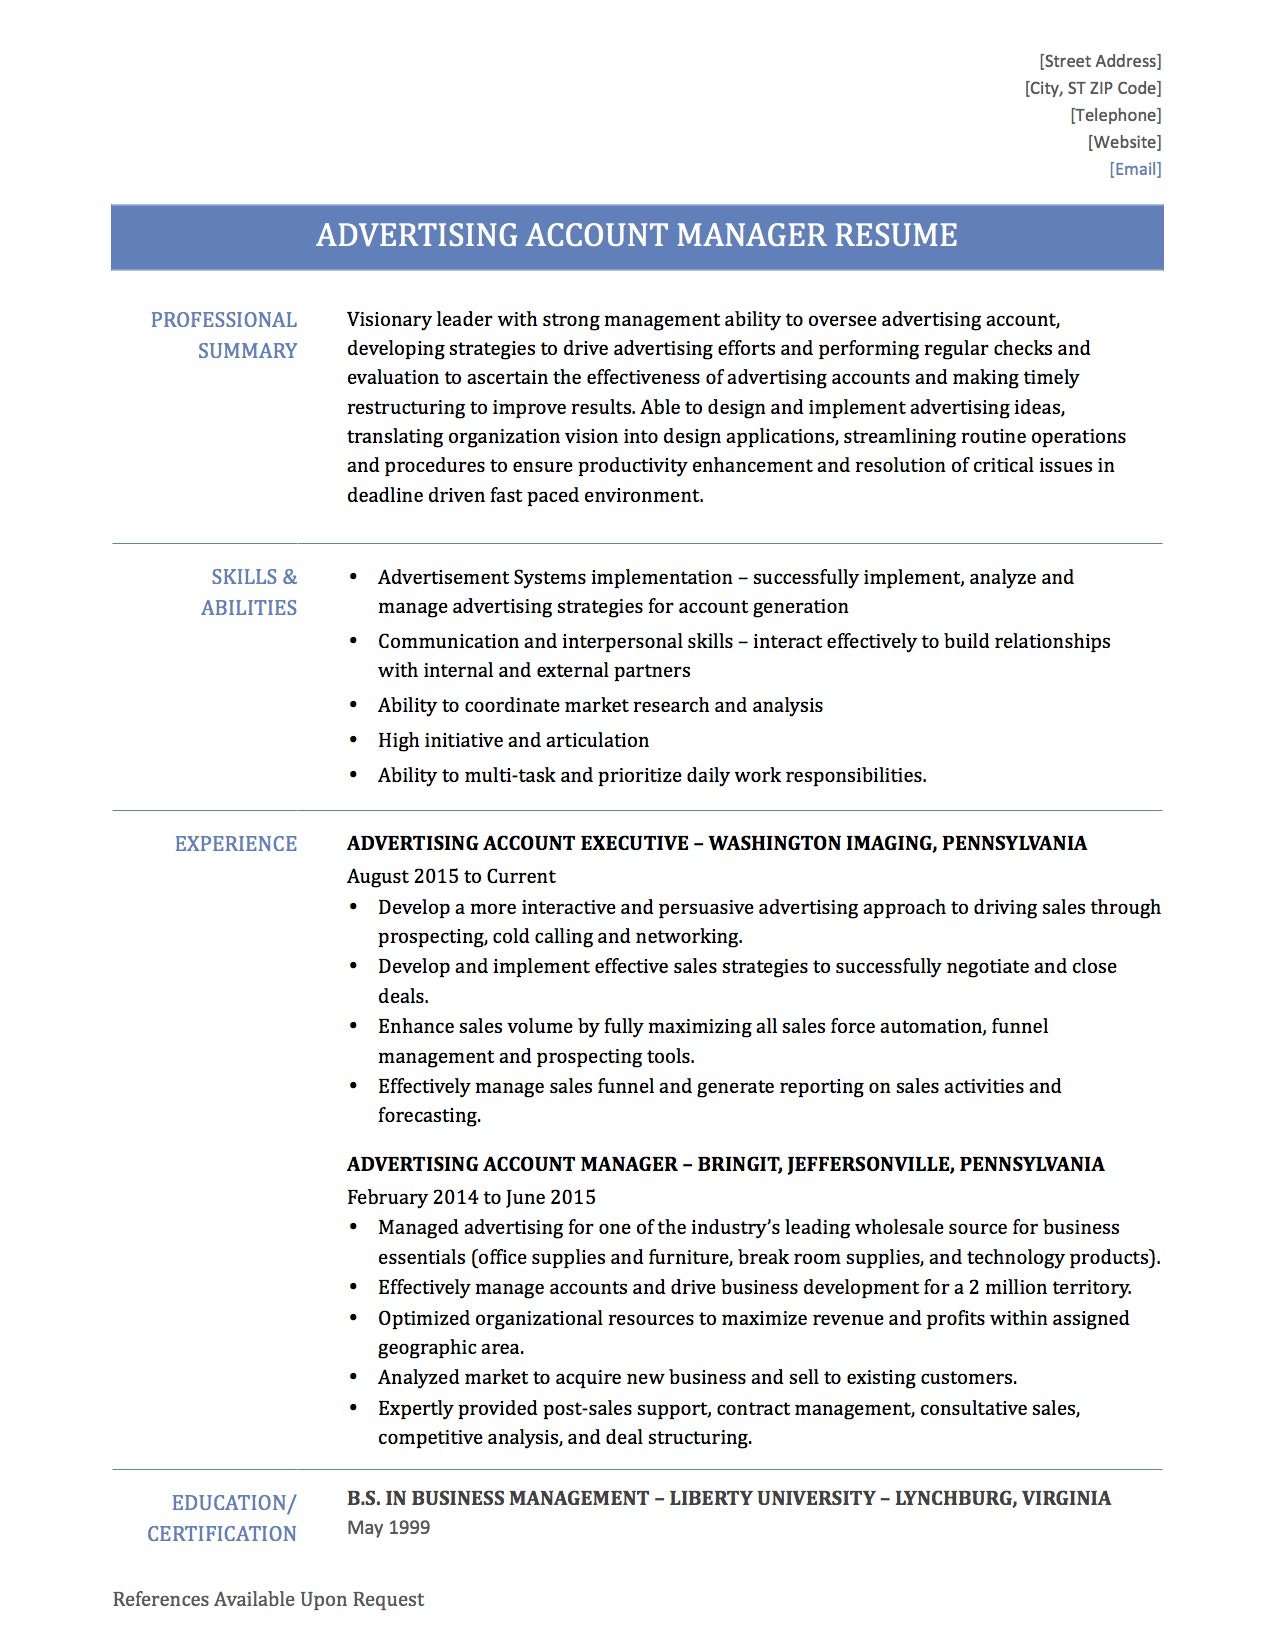 resume templates strategic account manager sample advertising agency